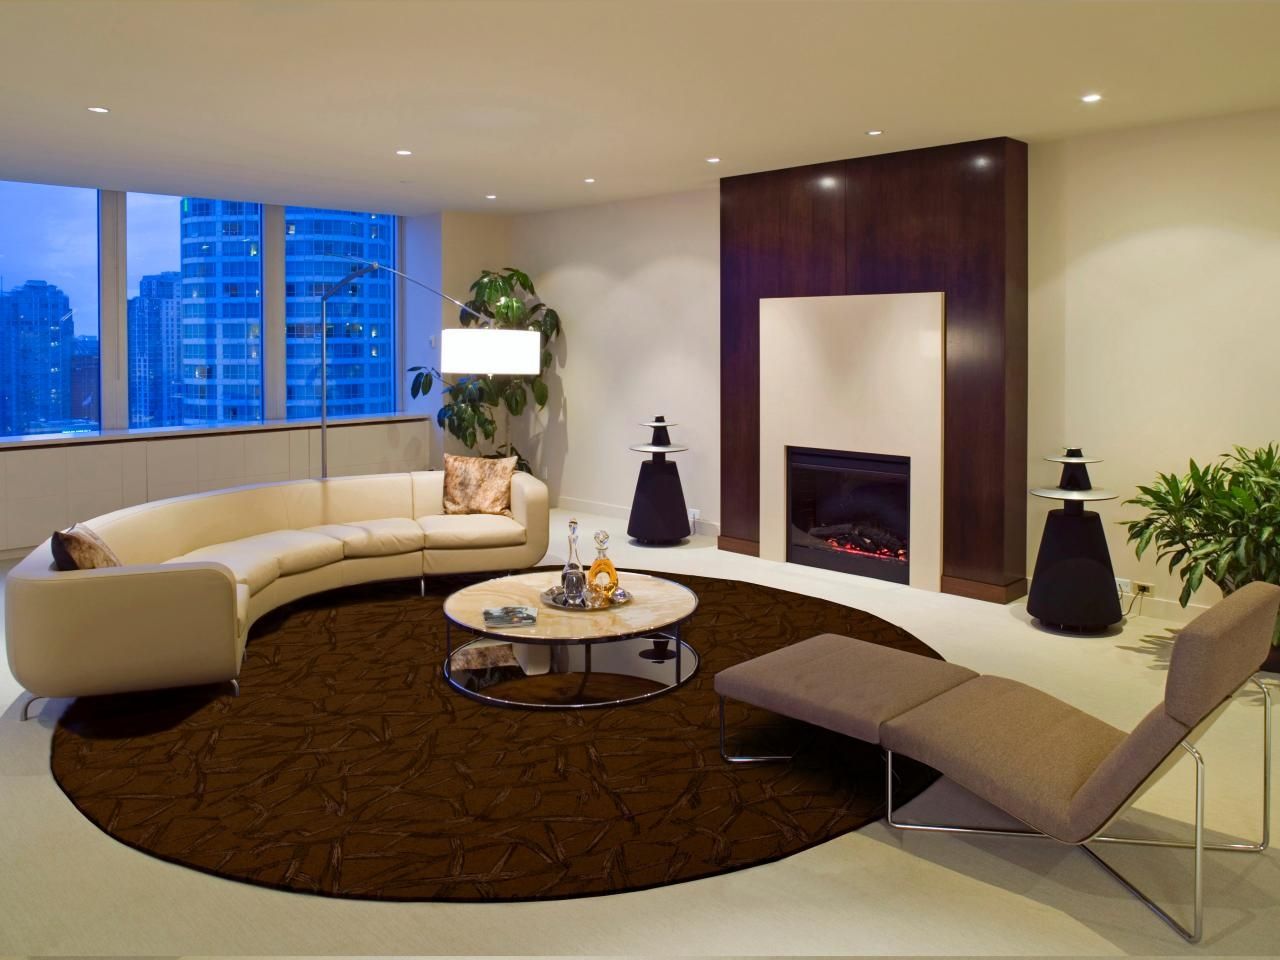 Choosing The Best Area Rug For Your Space Hgtv Intended For Rugs In Living Rooms (View 2 of 15)